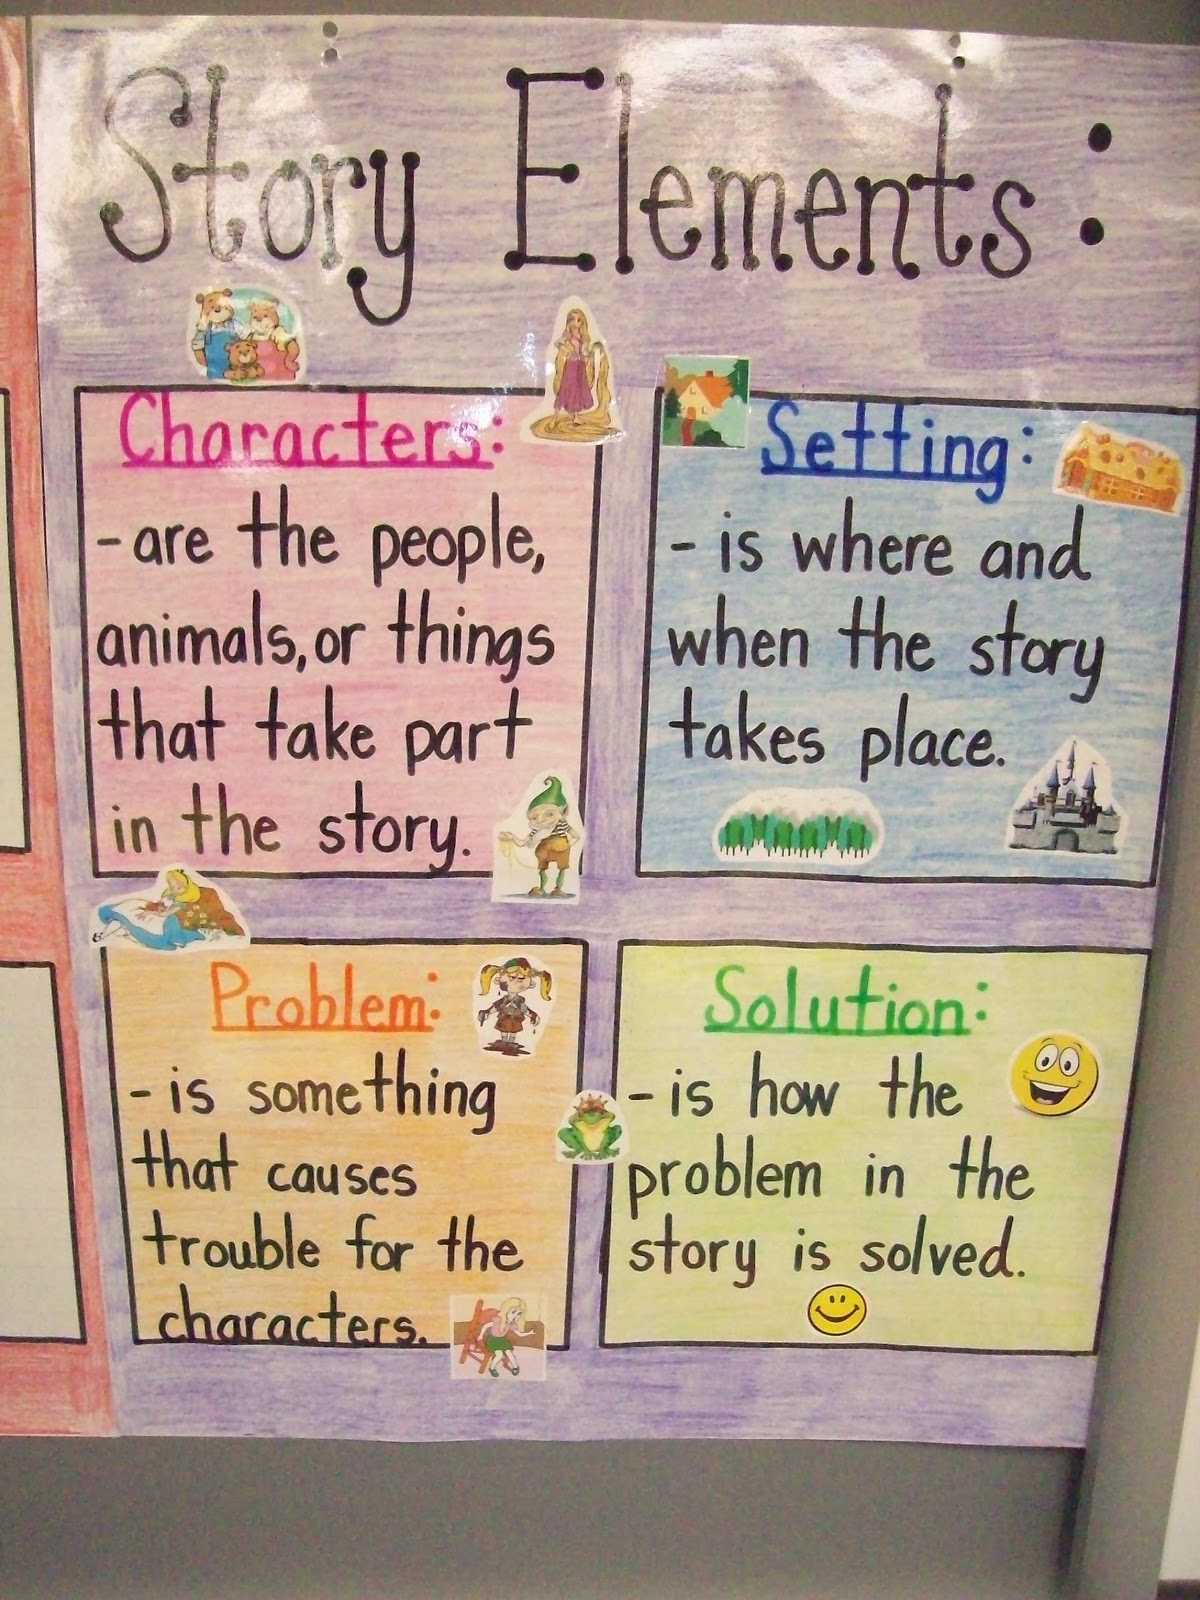 Elements Of A Fairy Tale Chart